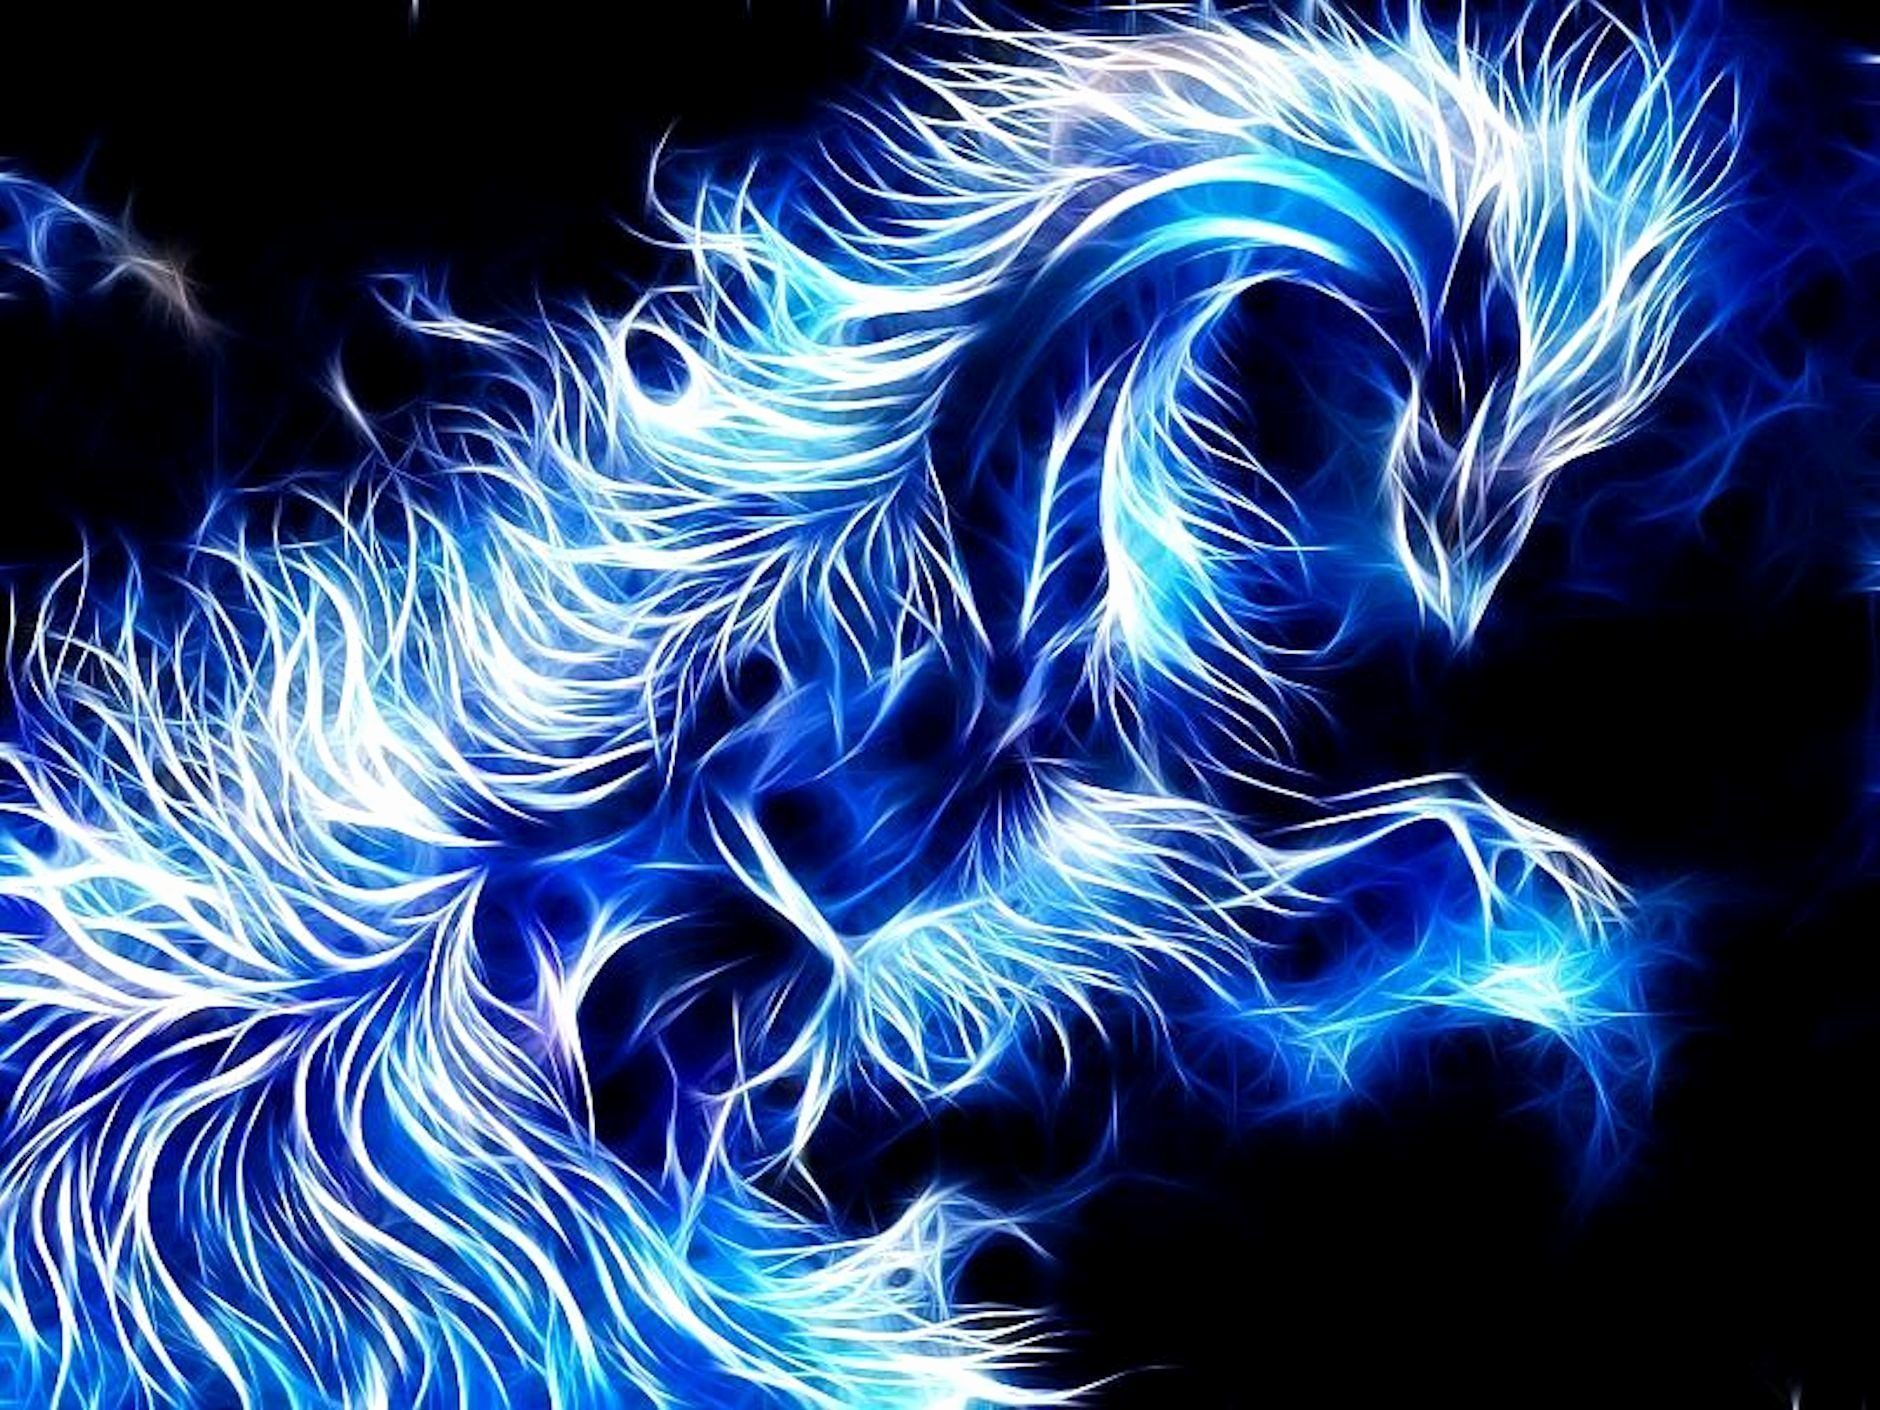 Blue Flaming Dragon Wallpapers 4k Hd Blue Flaming Dragon Backgrounds